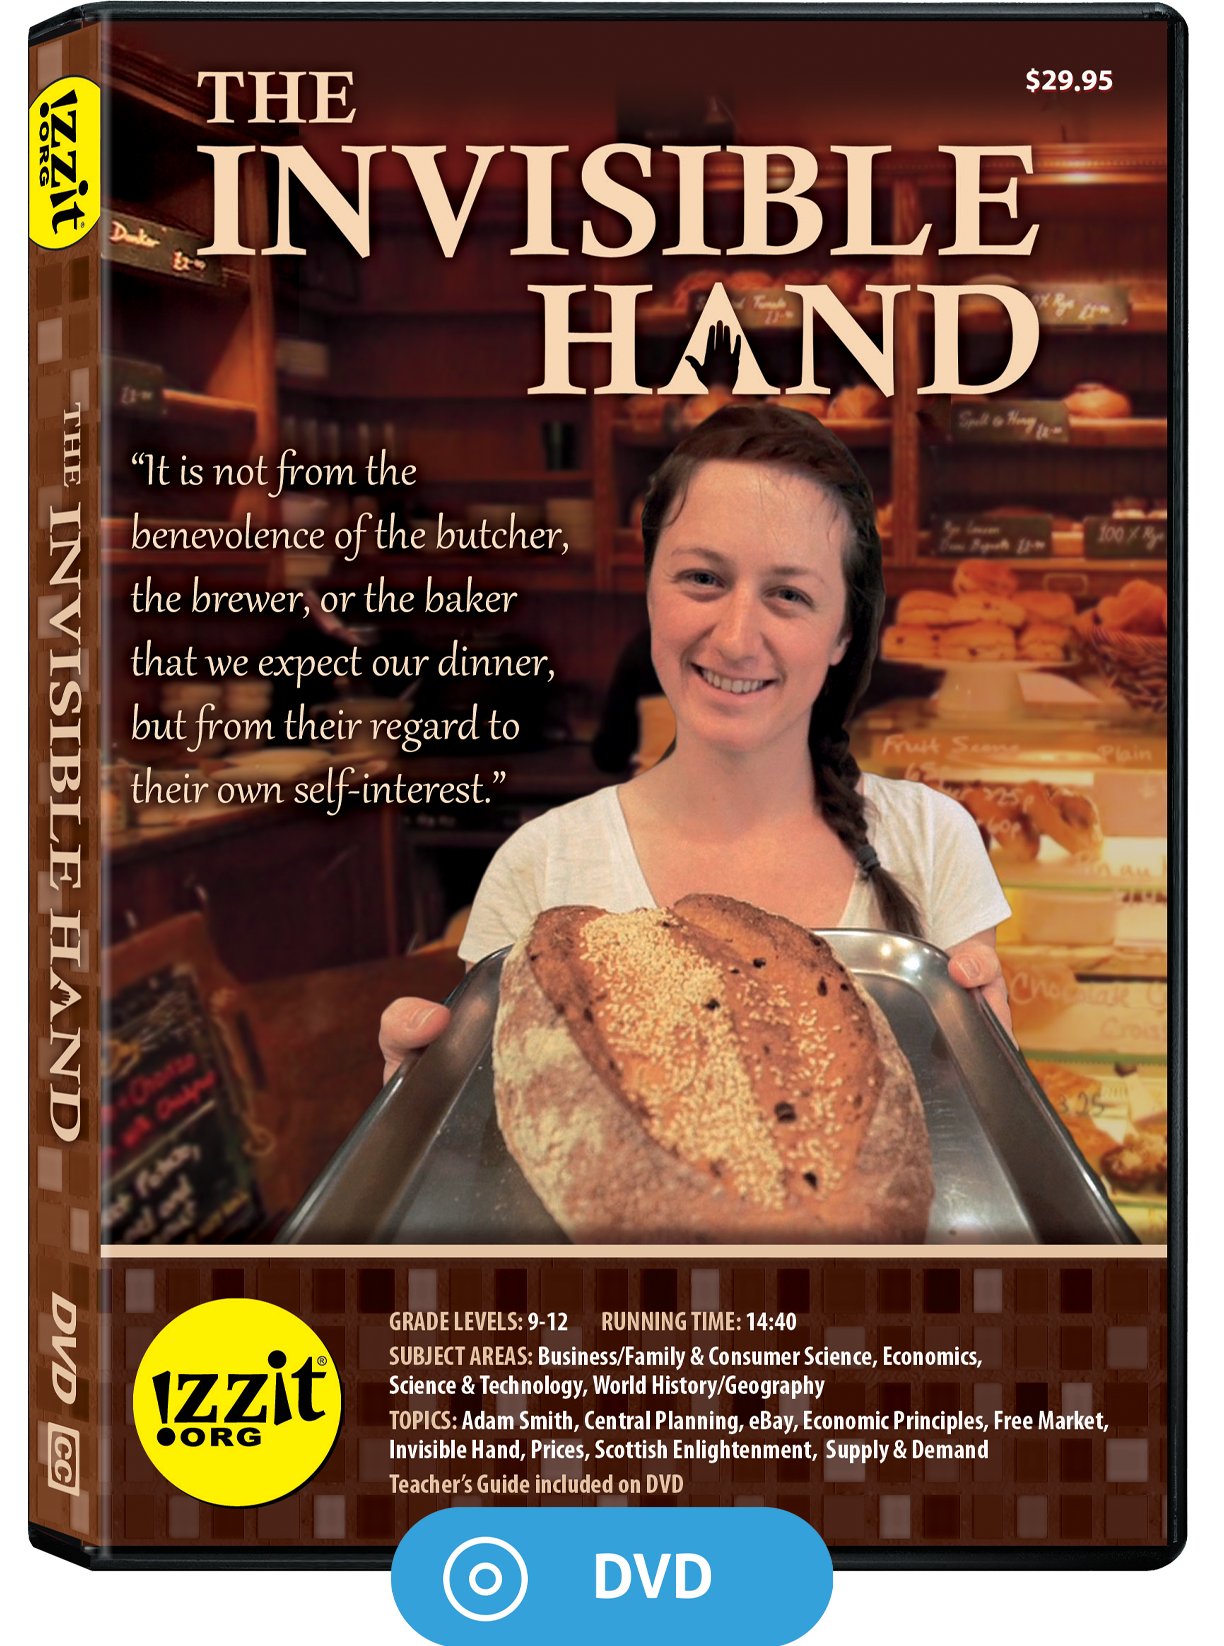 The Invisible Hand DVD